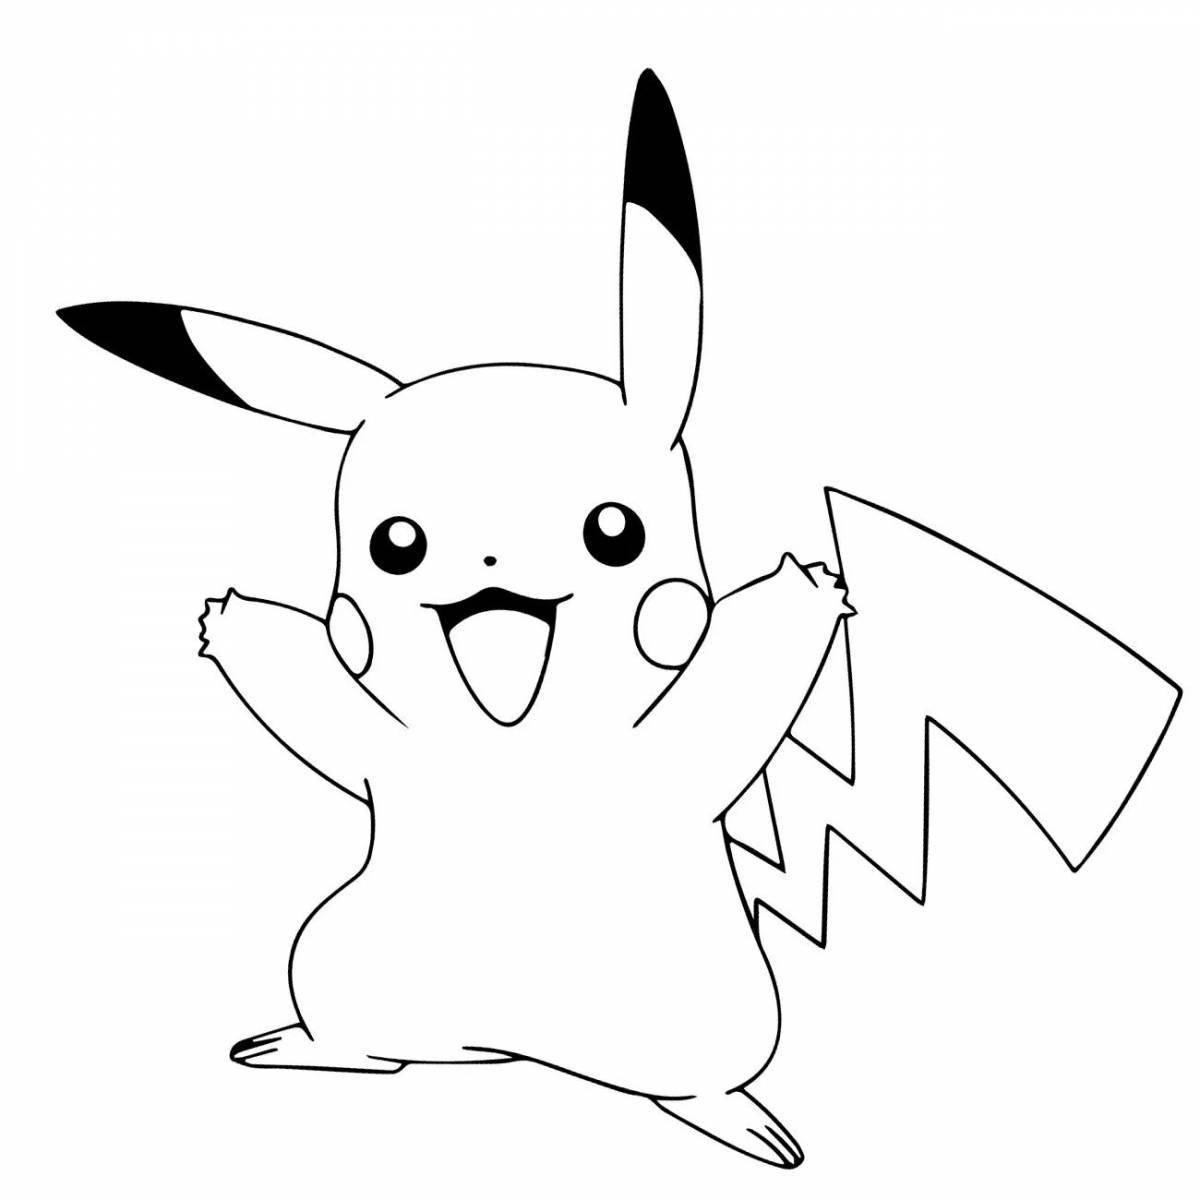 Adorable pikachu coloring page